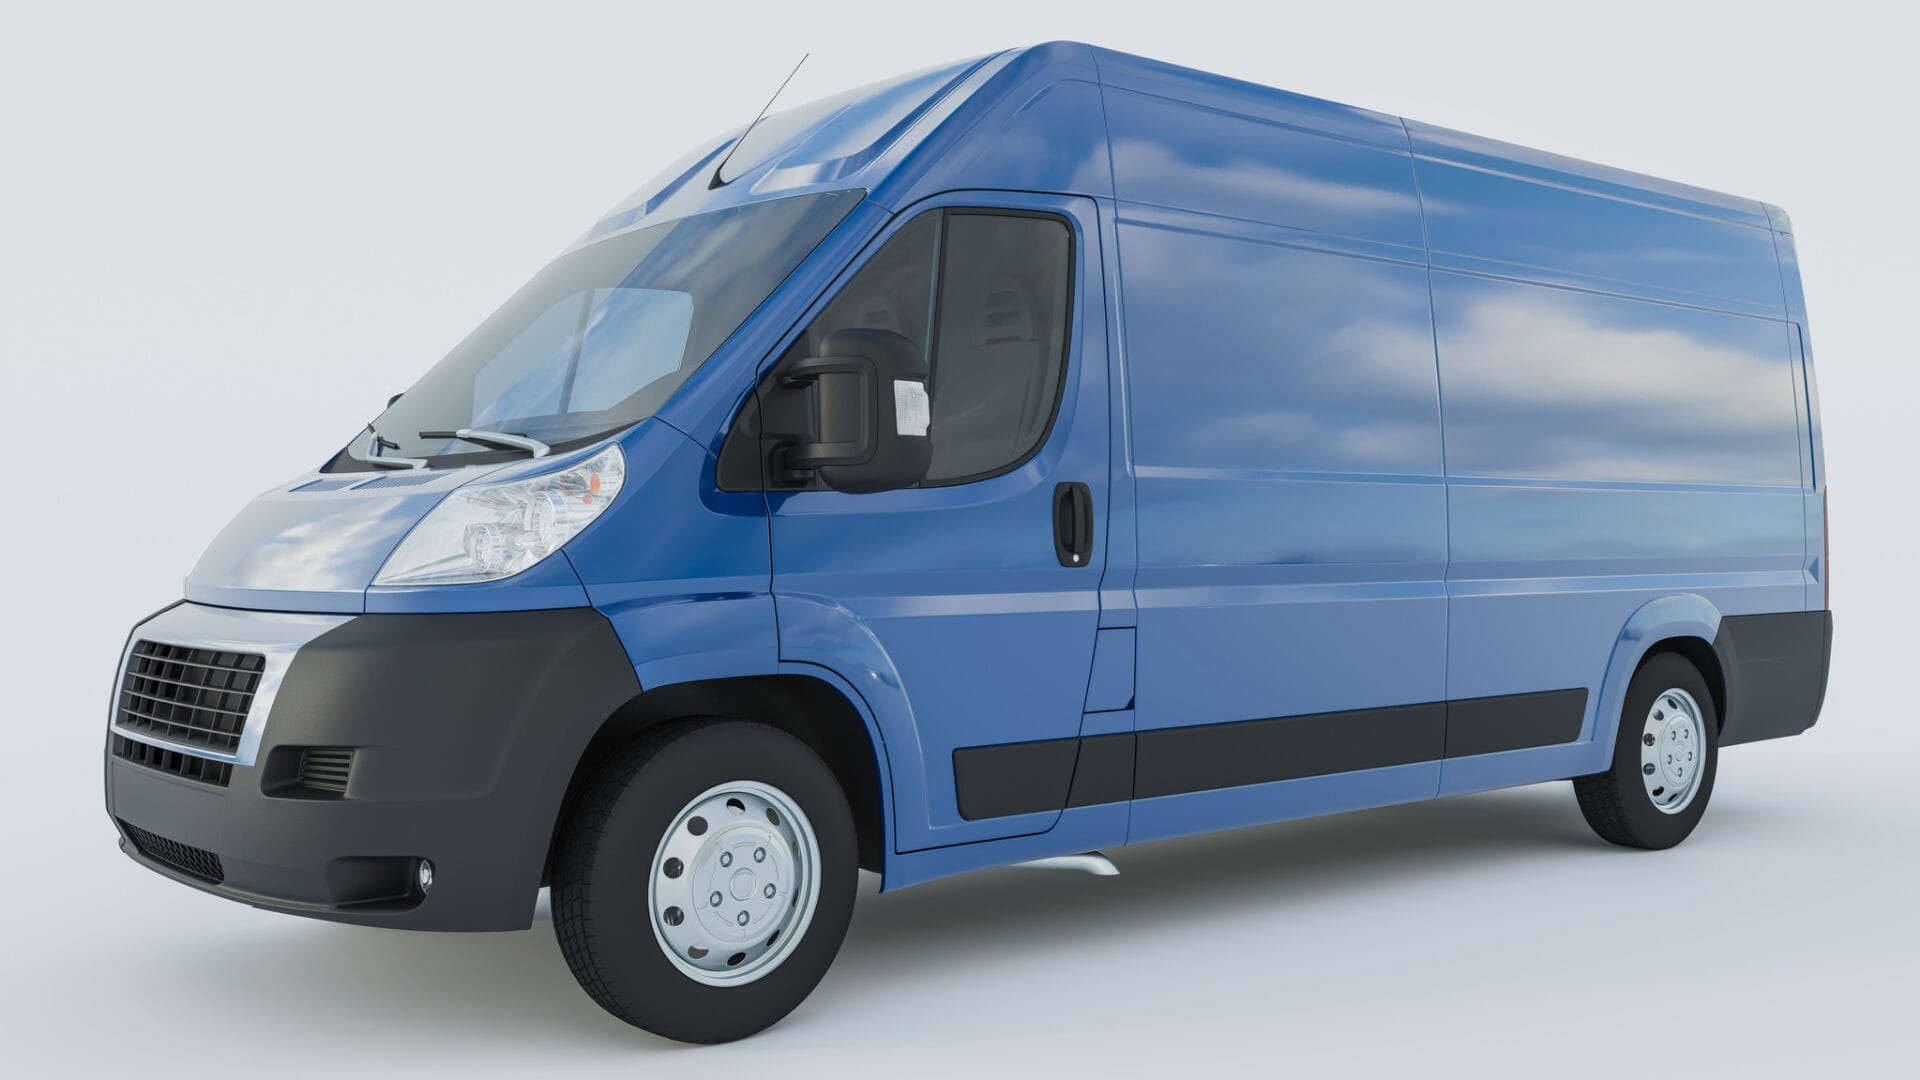 Advantages and Disadvantages of New and Used Vans